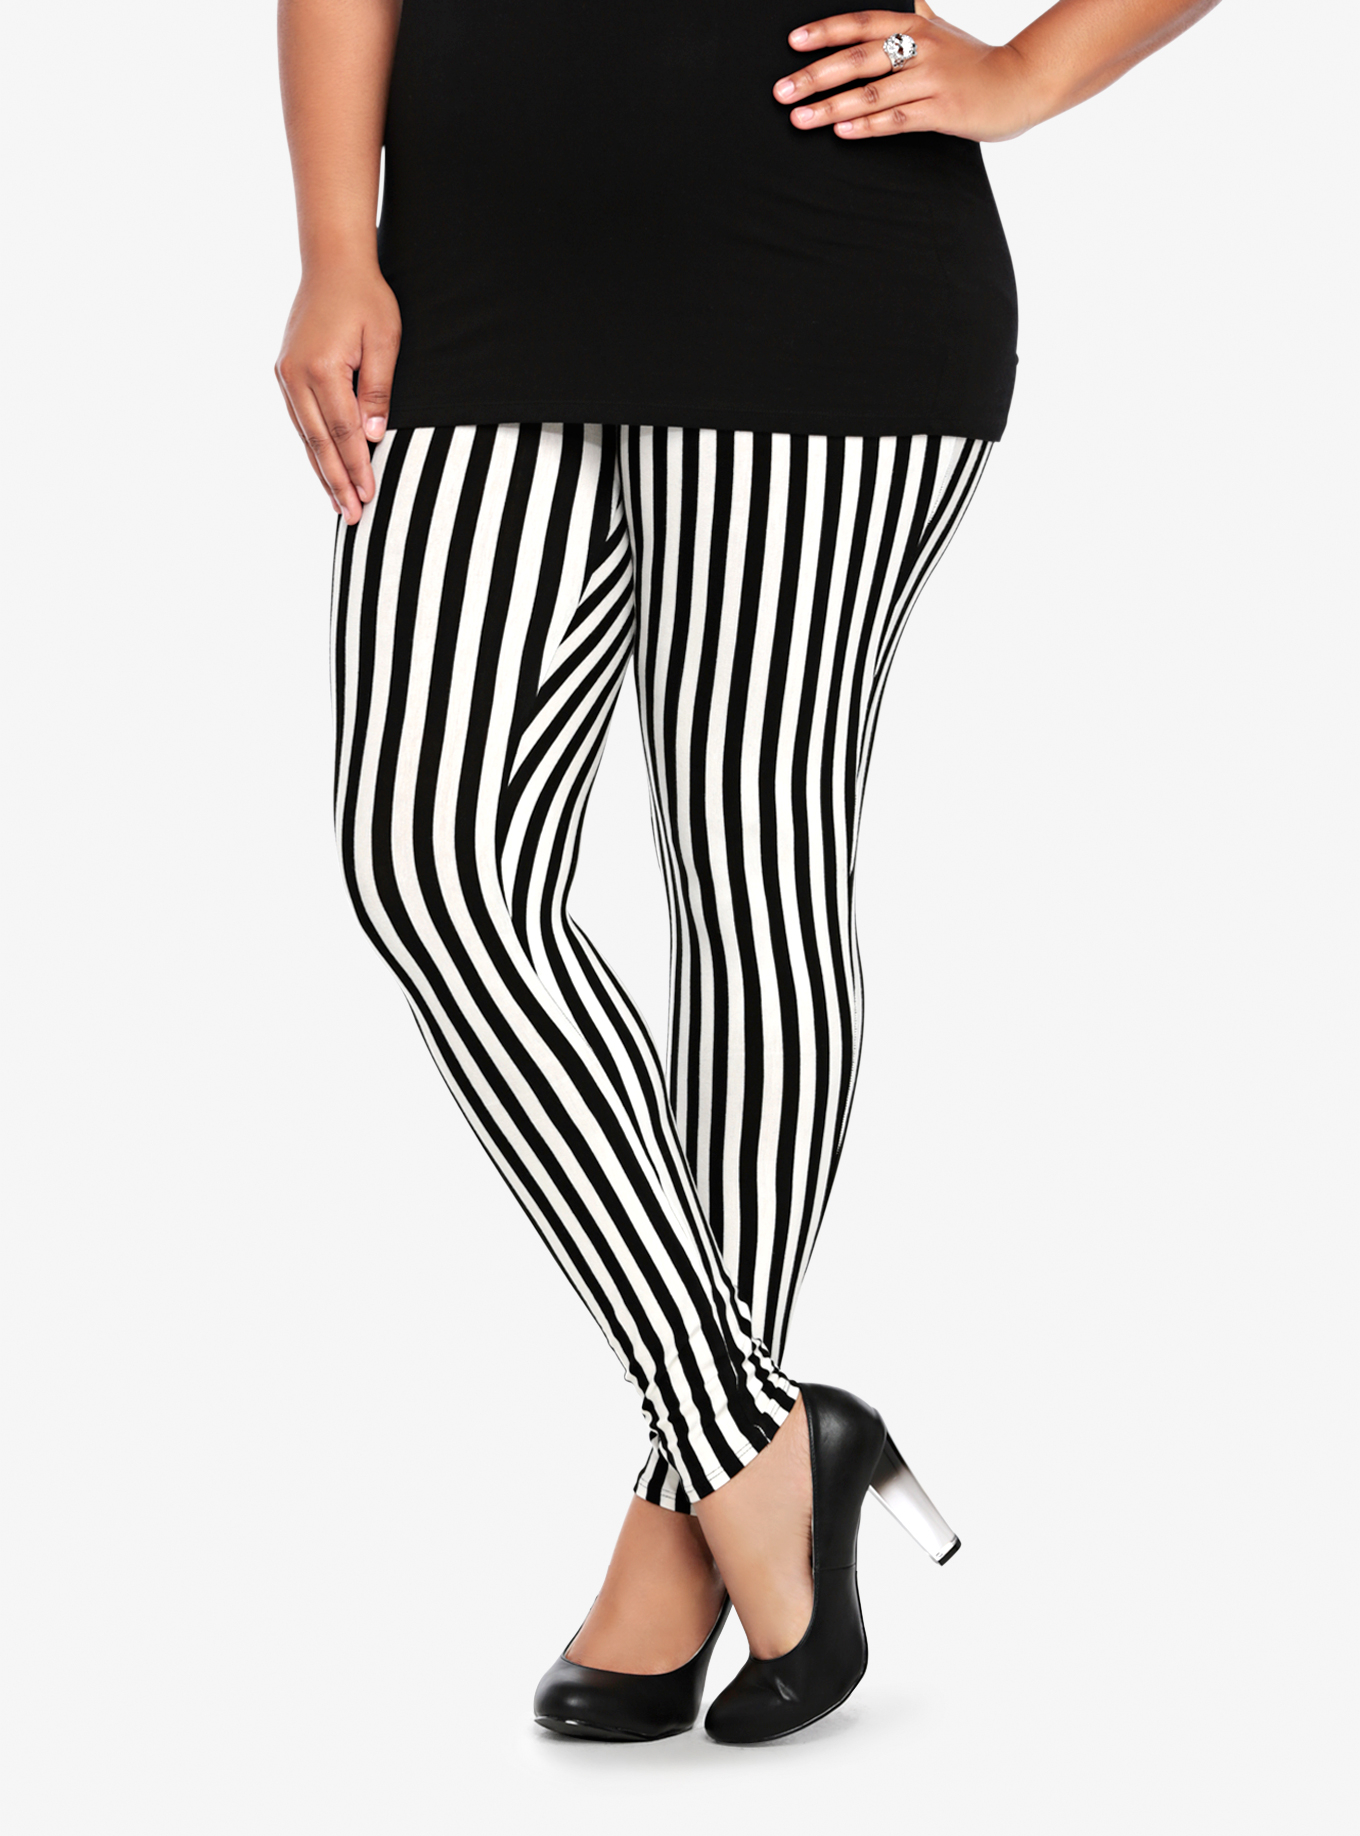 EVERY FAT GIRL NEEDS THESE LEGGINGS #fat #fatgirl #plussize #plus #pl